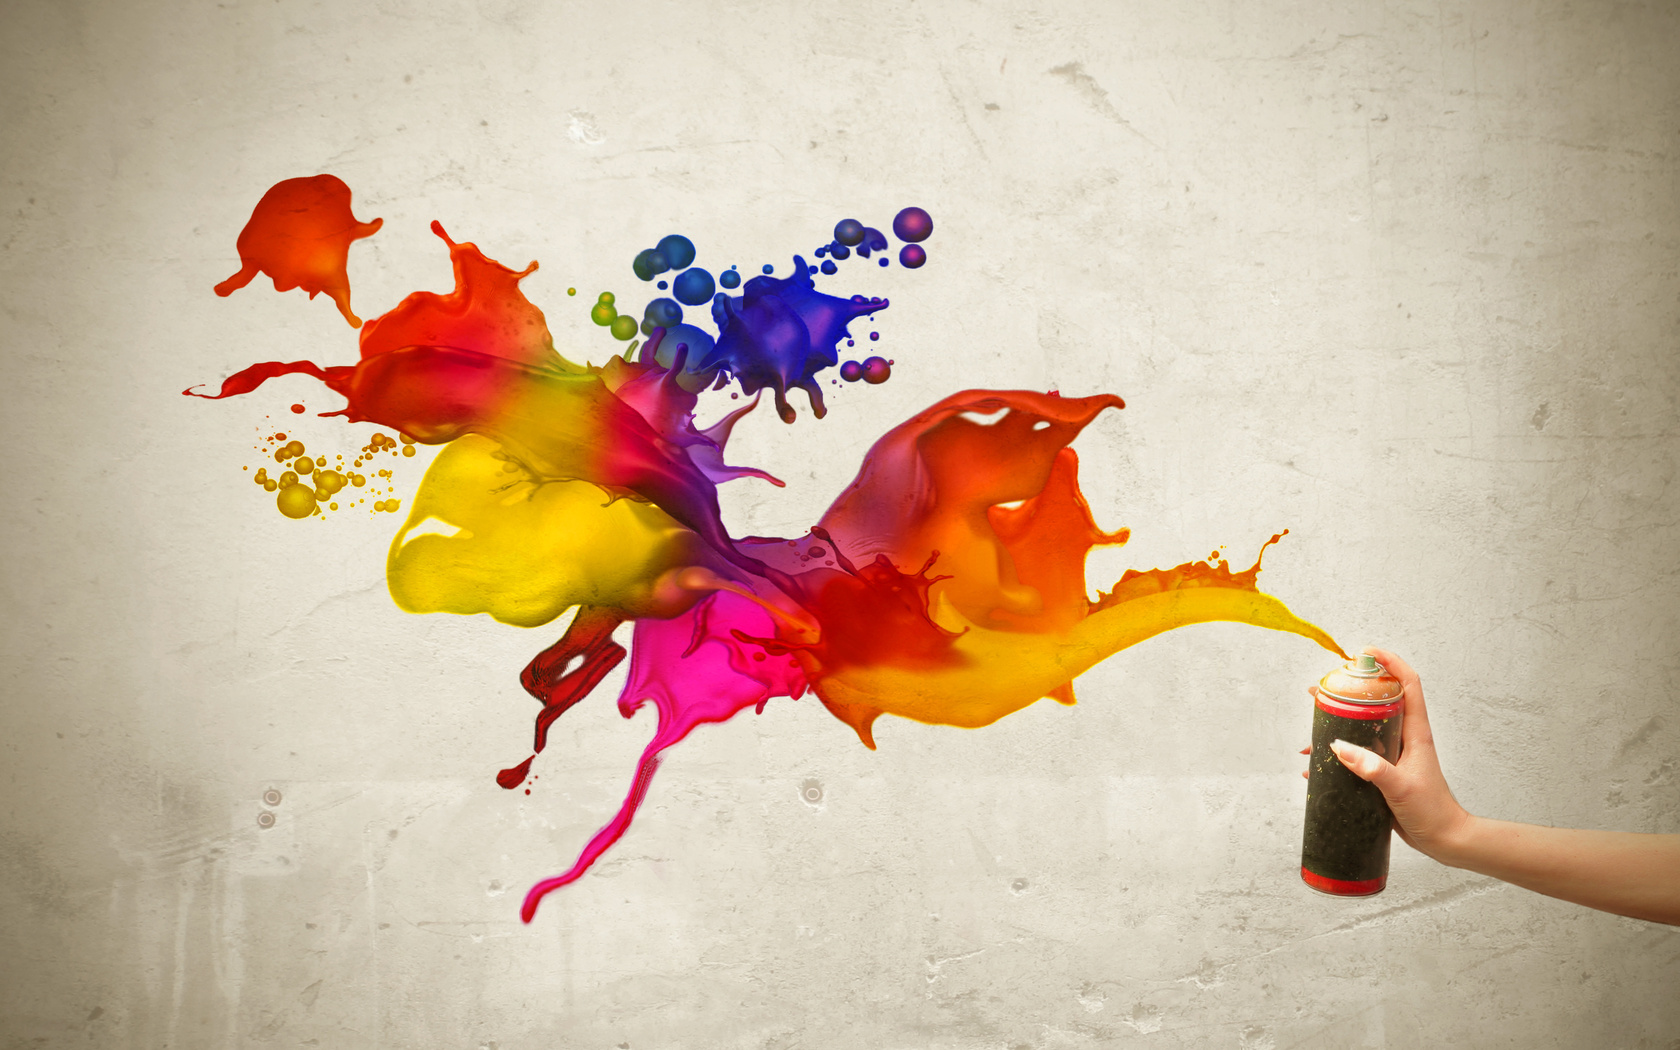 Mastering the Five Levels of Creativity (Part 2)